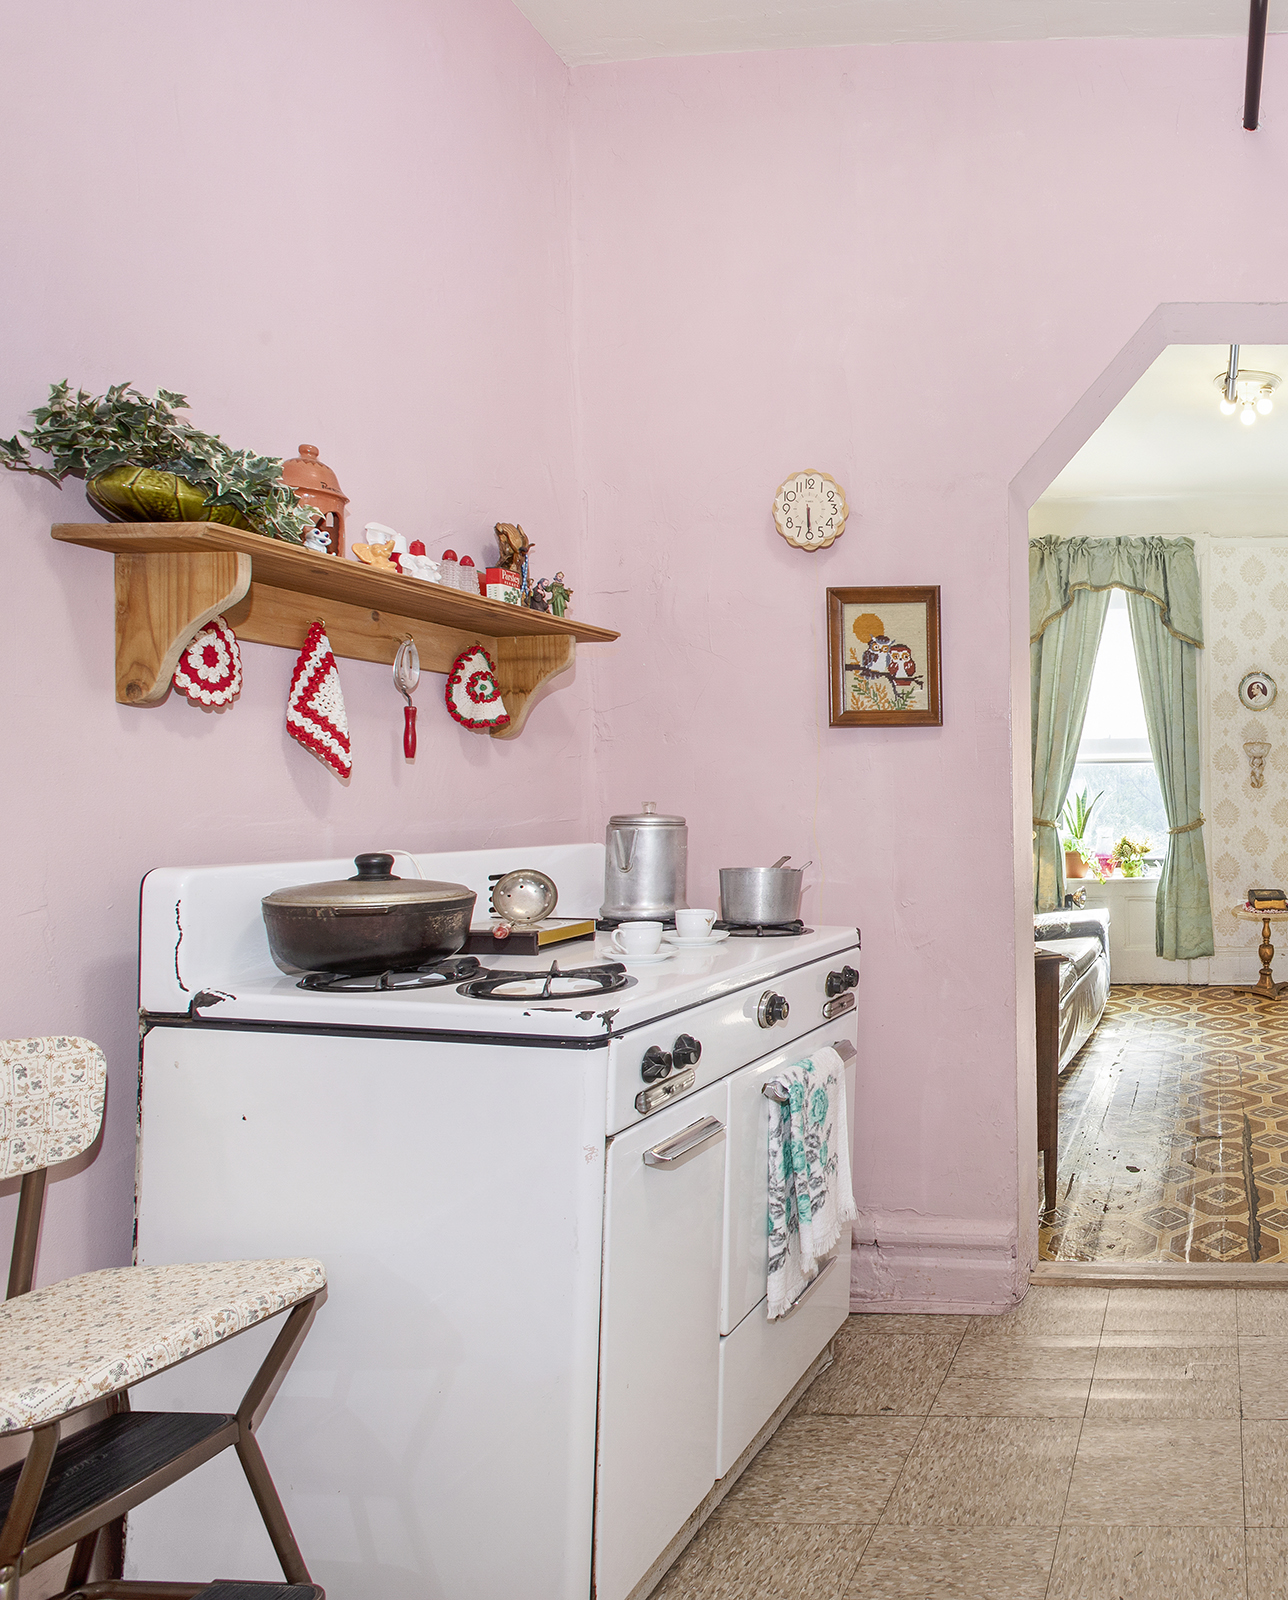 Tenement Room with pink wall and stove